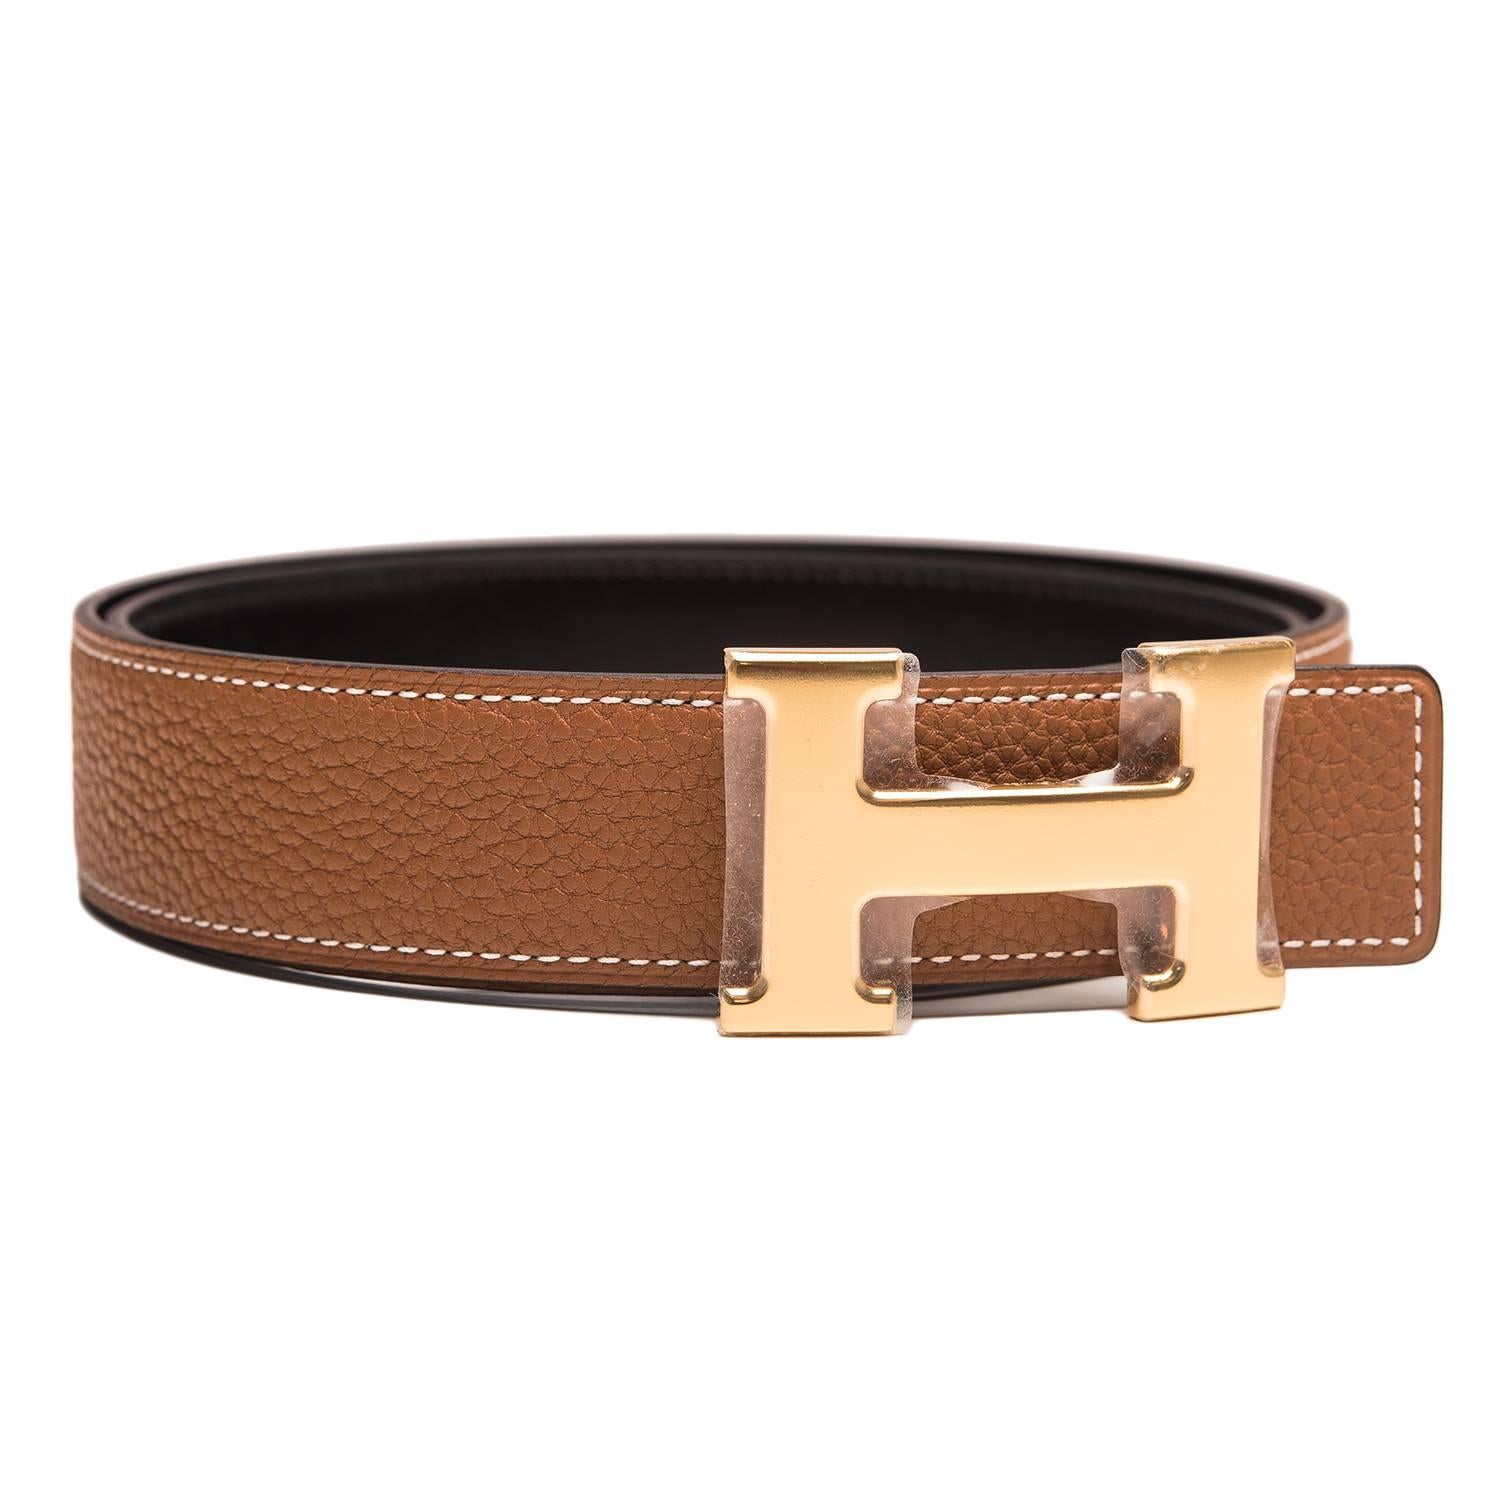 Hermes belt kit comprising an adjustable wide 32mm Constance H belt of Black calfskin with tonal stitching reversing to Gold epsom with tonal stitching accompanied by a removable gold plated H buckle.

Origin: France

Condition: Pristine, never